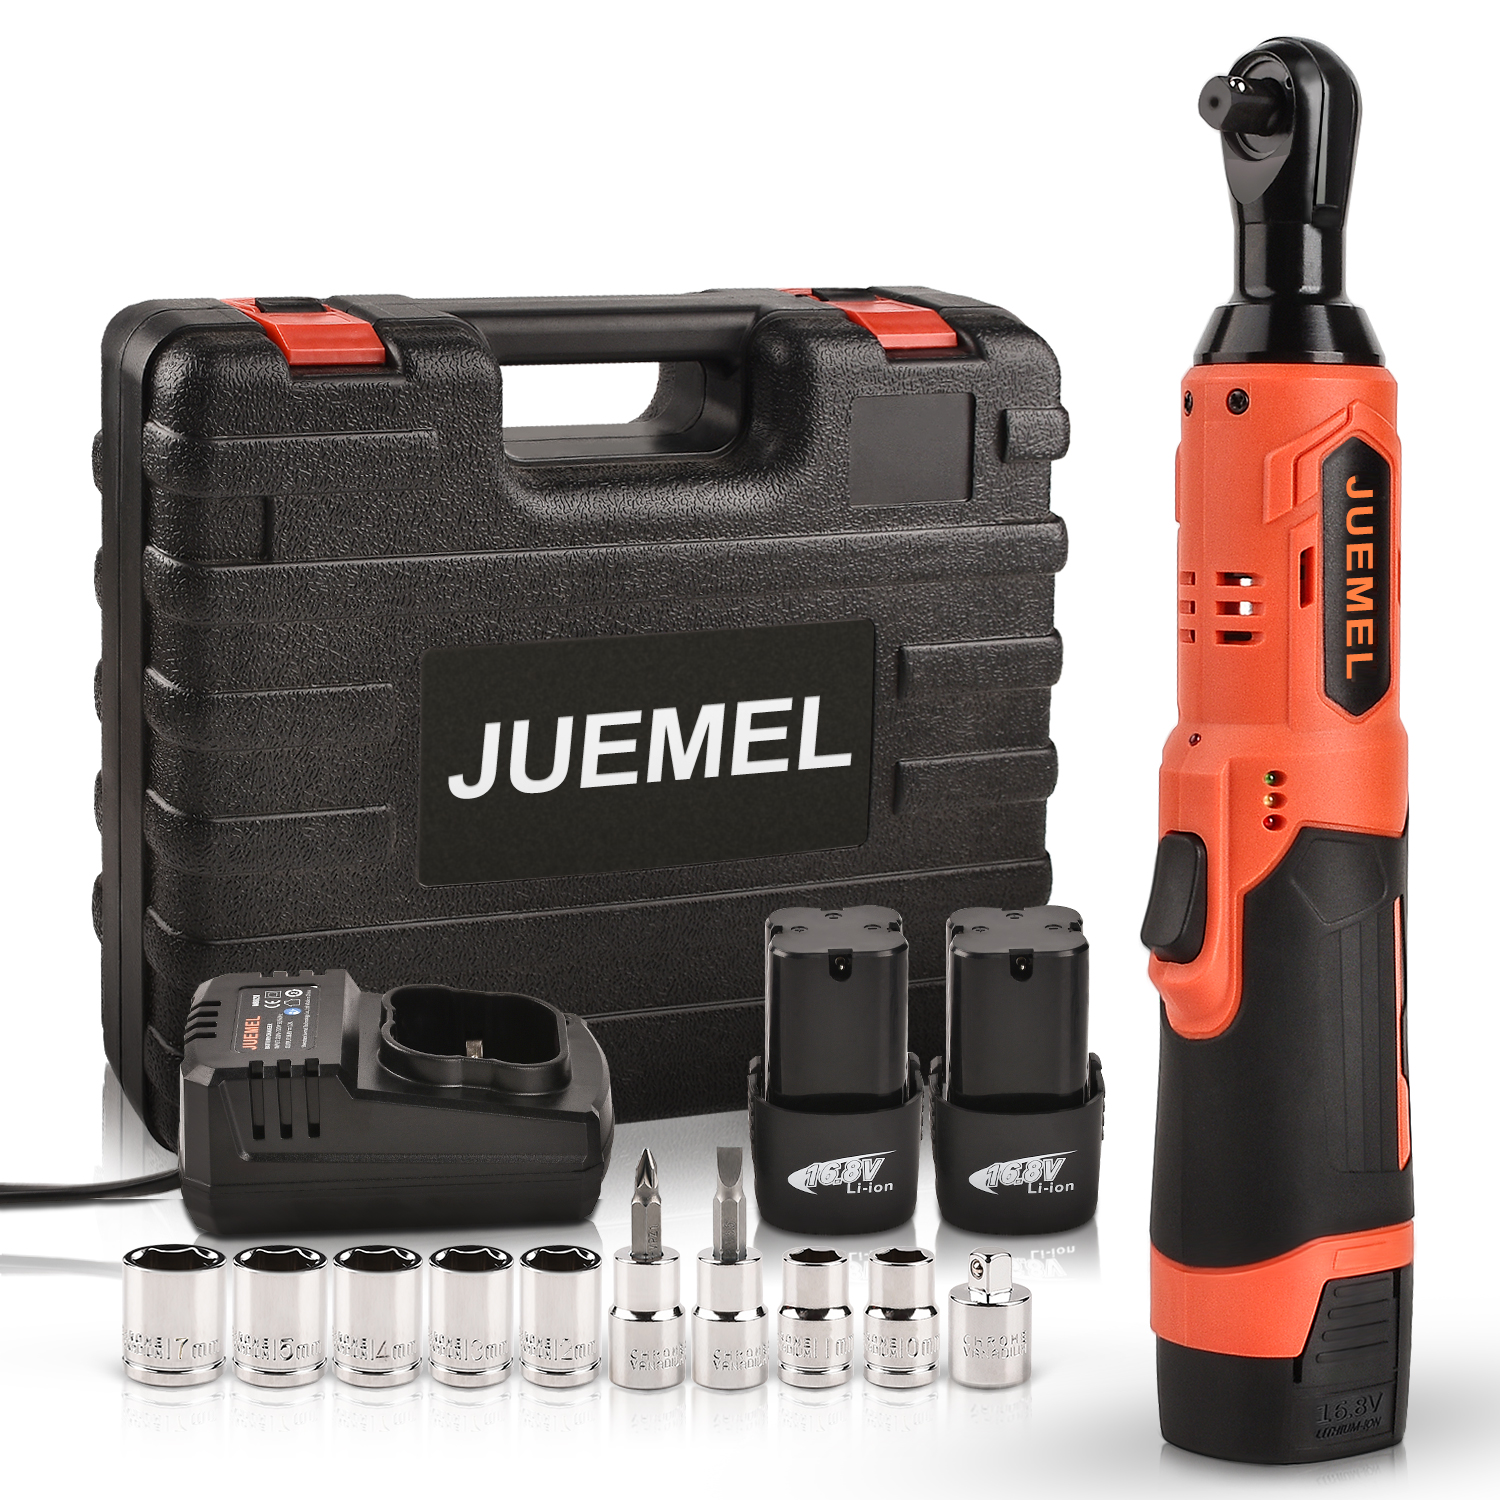 16.8V Cordless Ratchet Wrench Kit, JUEMEL Electric Ratchet Wrench 3/8